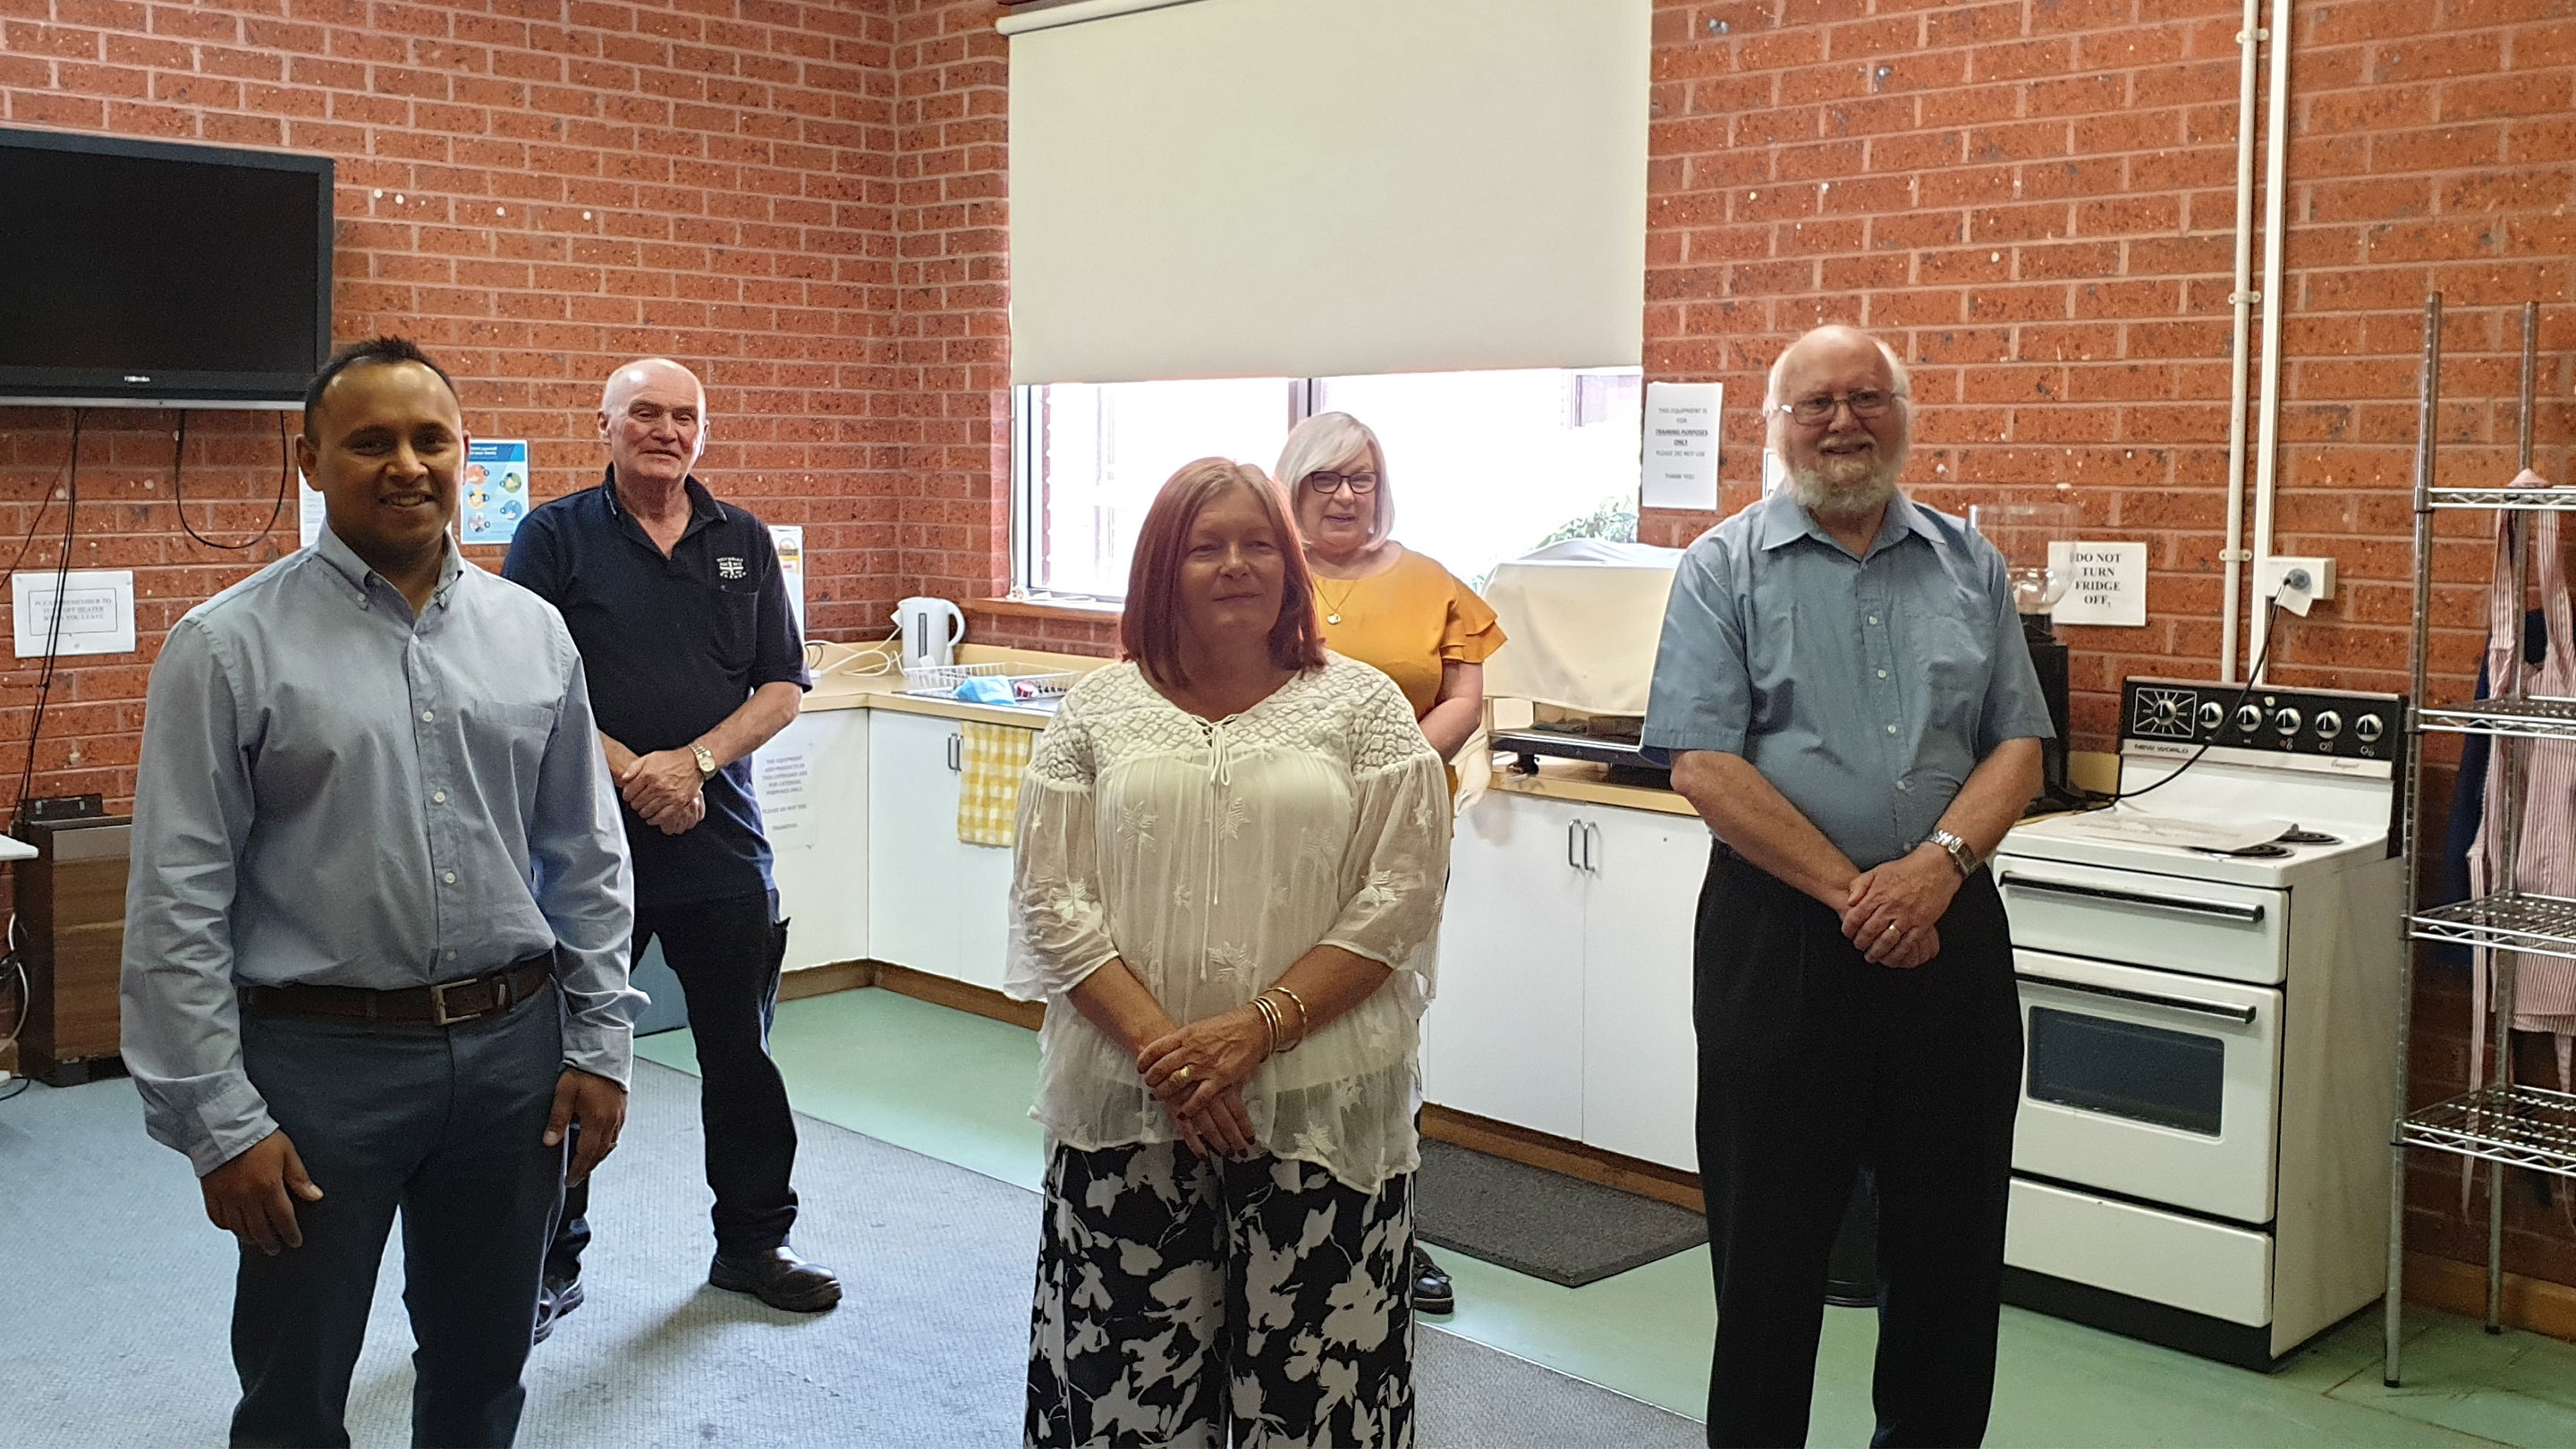 It was great to meet the team at Gippsland Employment Skills Training who will be able to upgrade their kitchen facility thanks to our funding this year.